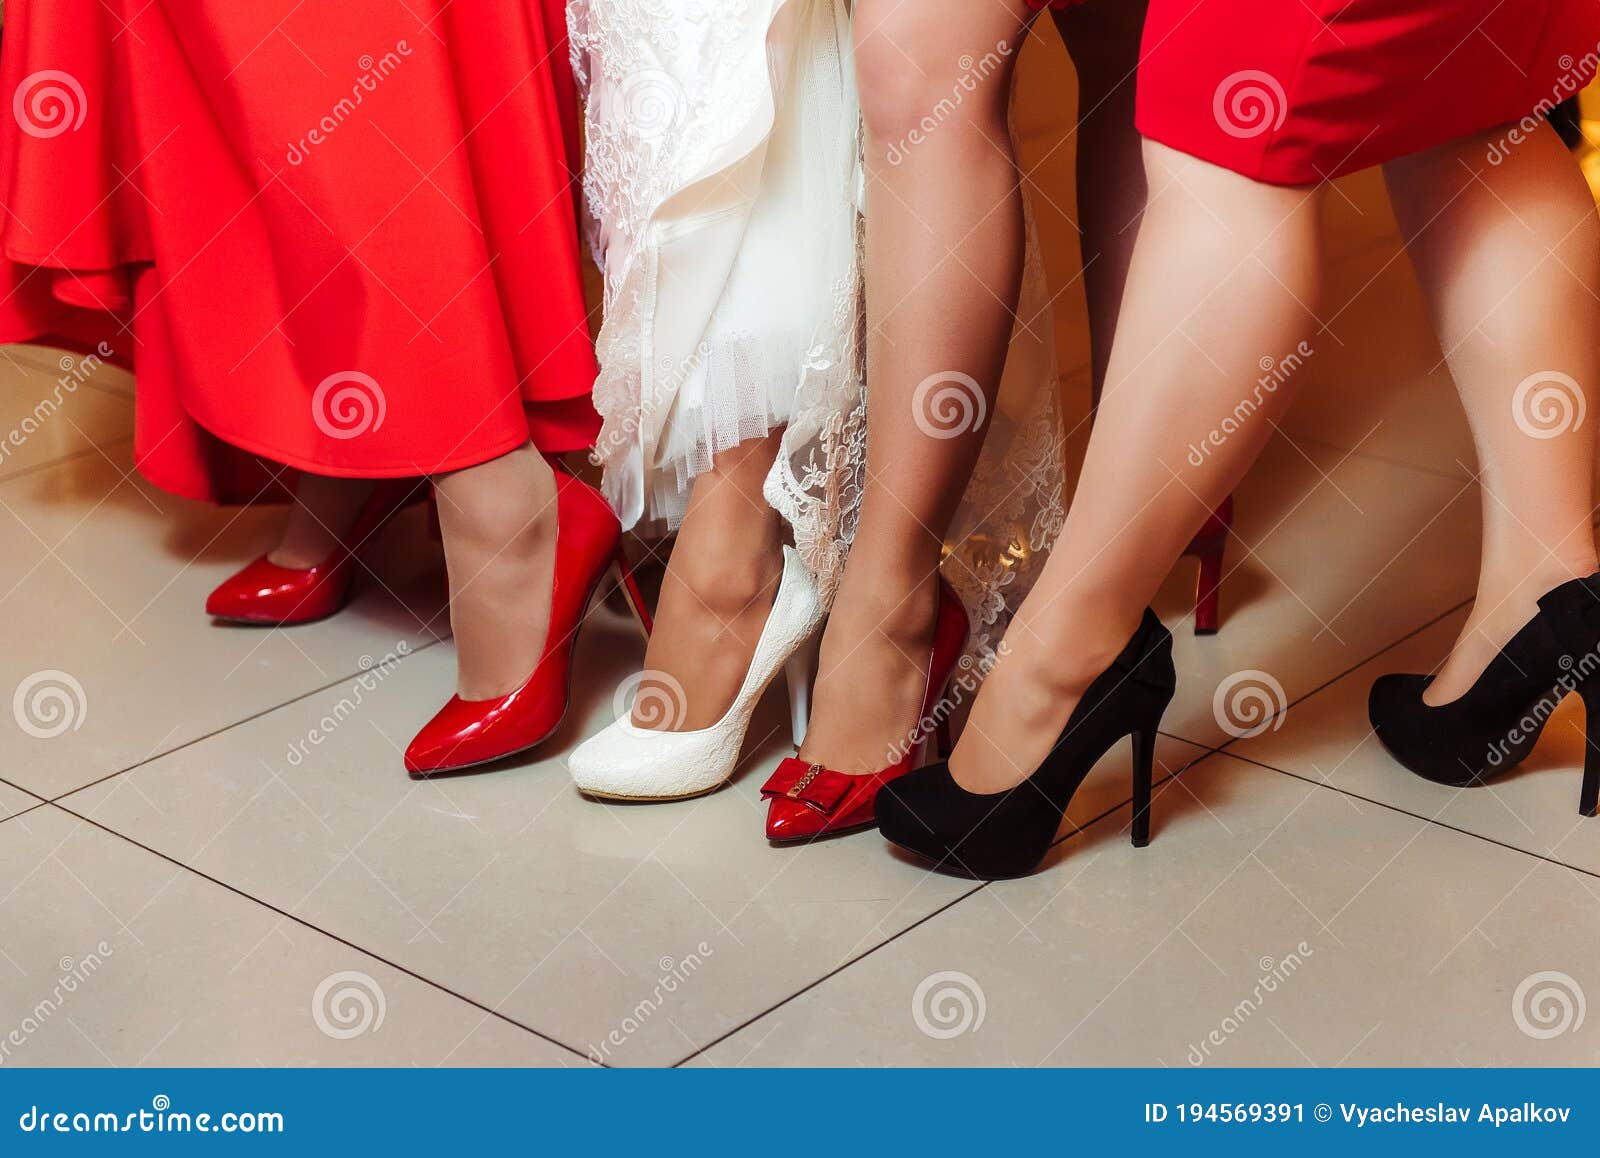 Beautiful Female Legs. Several Girls in Designer Shoes Stock Image - Image  of body, foot: 194569391